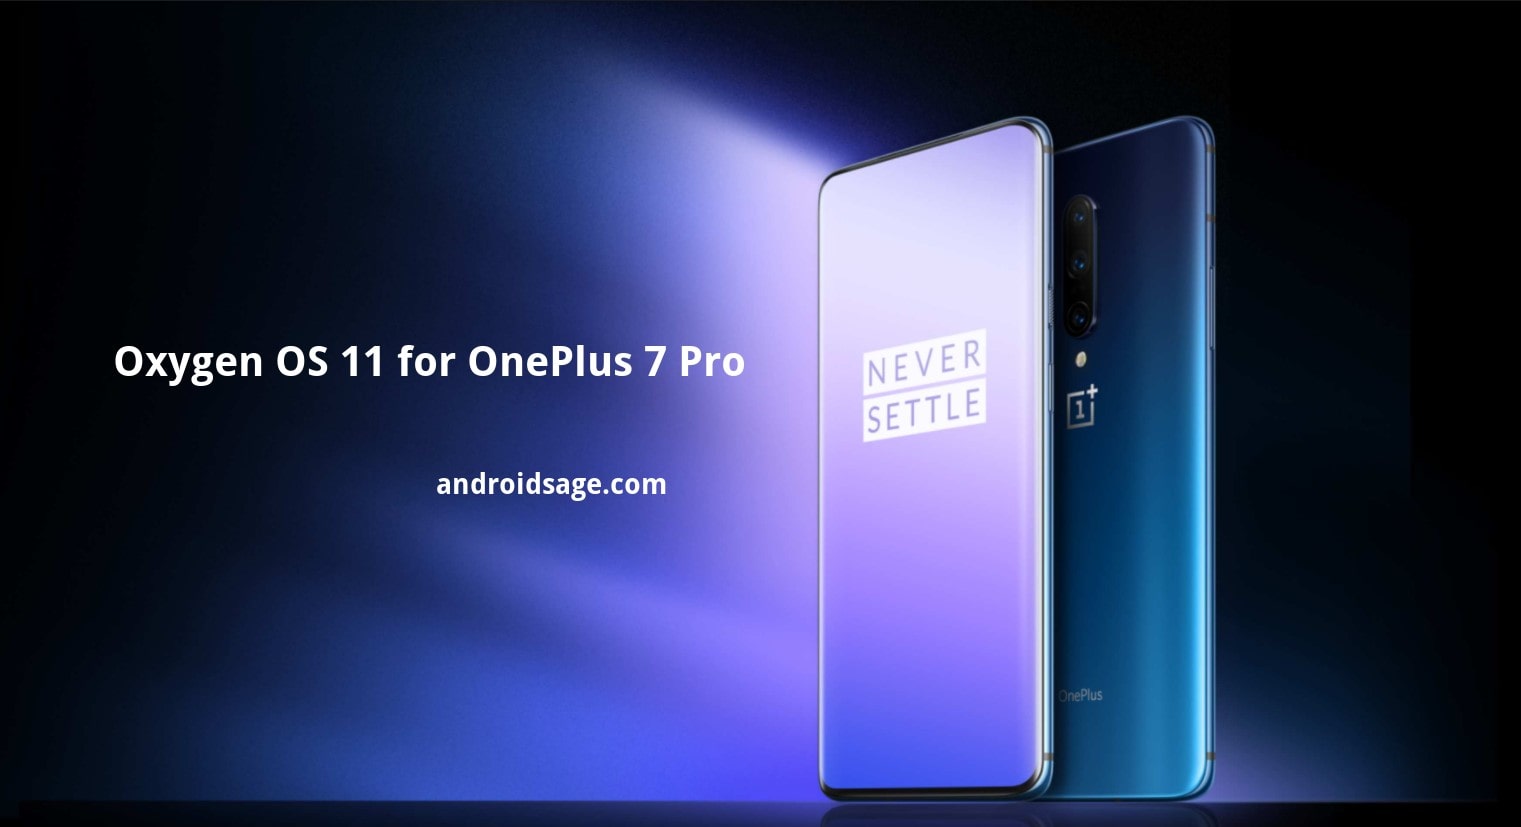 OnePlus 7 Pro Android 11 based on Oxygen OS 11 download